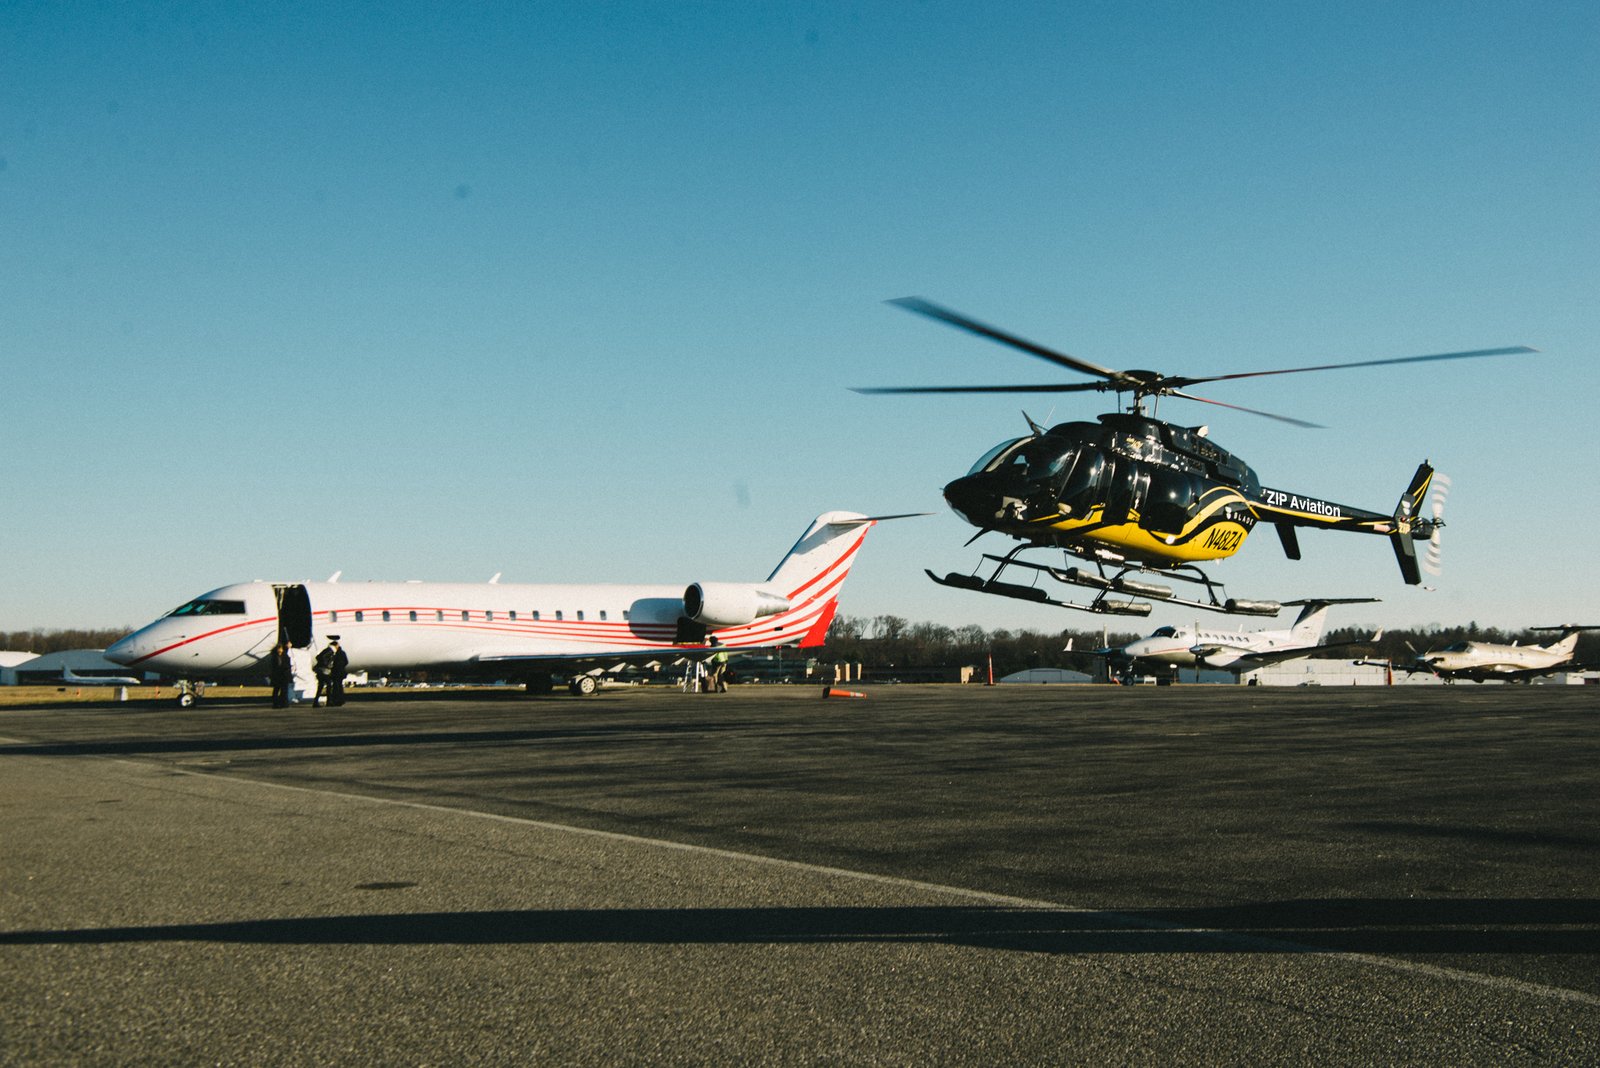 Jet And Helicopter Rental in Dubai